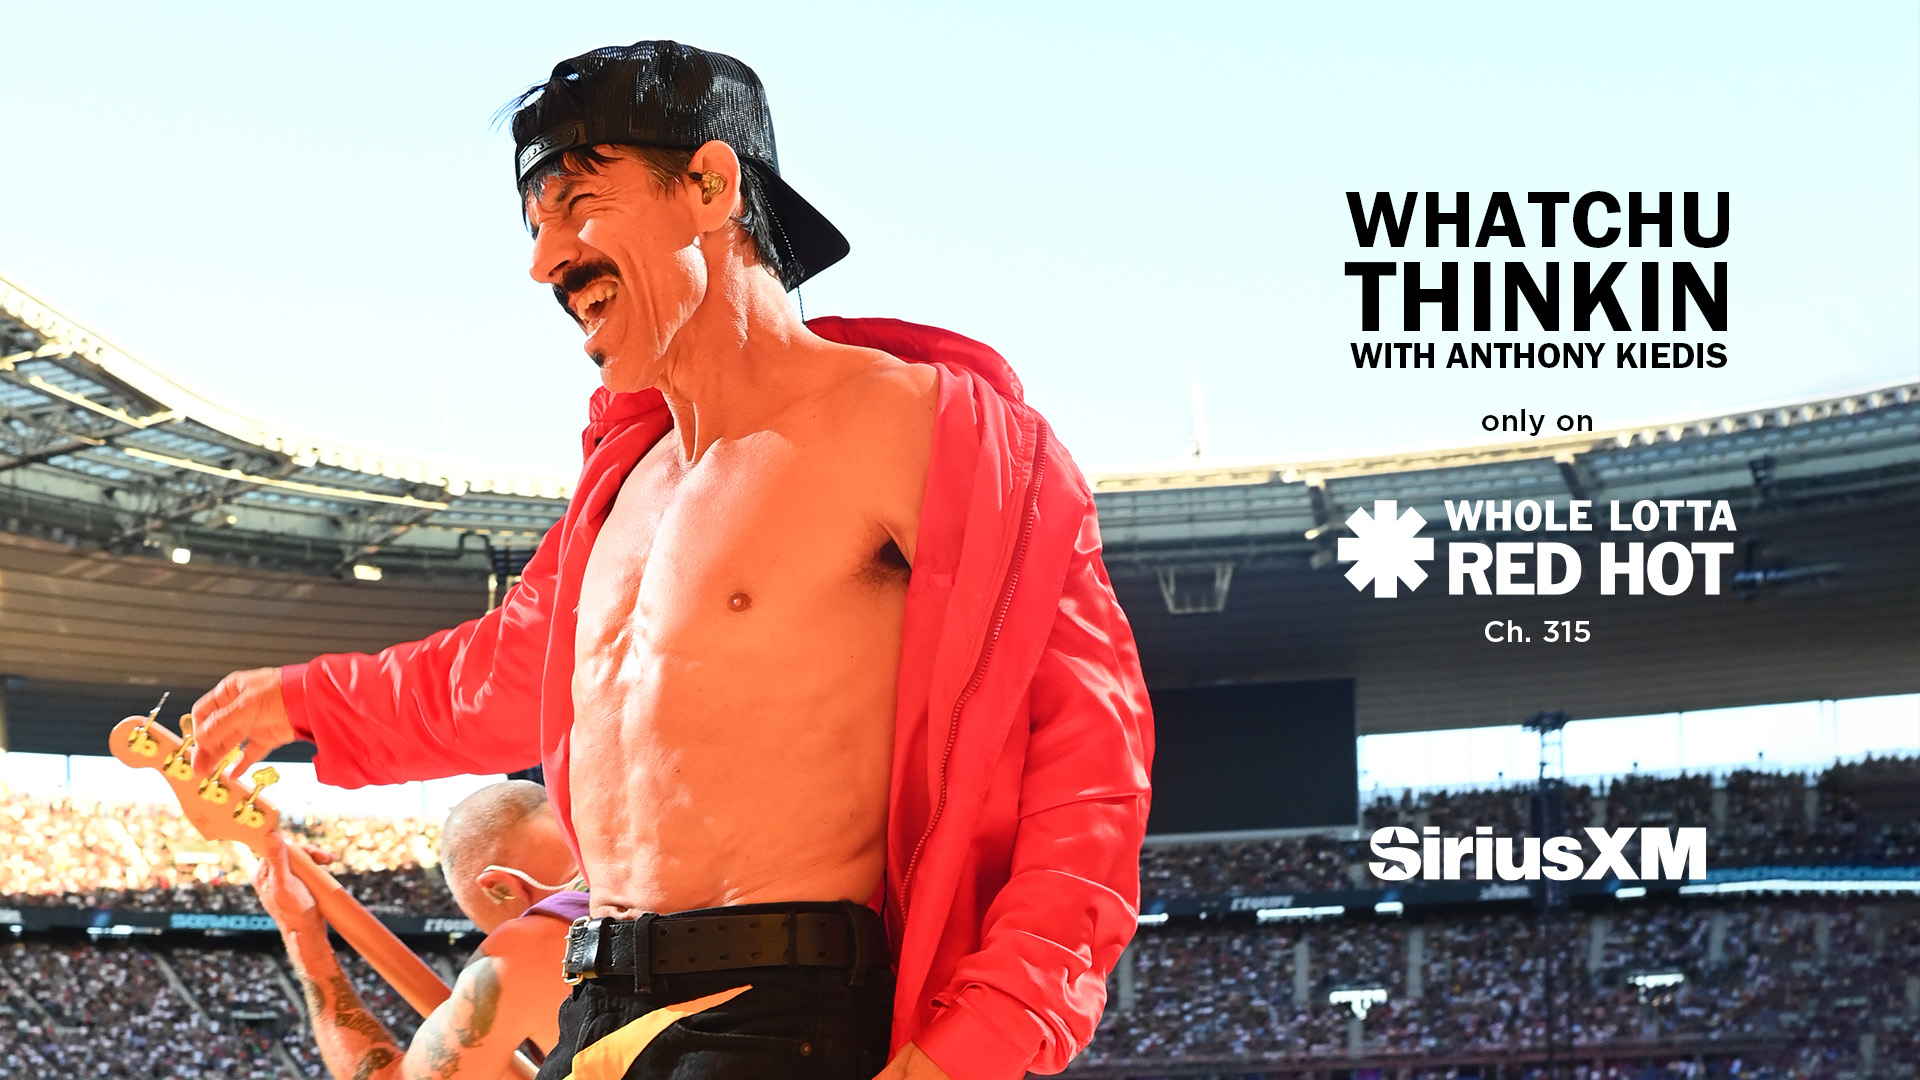 Whatchu Thinkin' with Anthony Kiedis - Whole Lotta Red Hot - only on SiriusXM